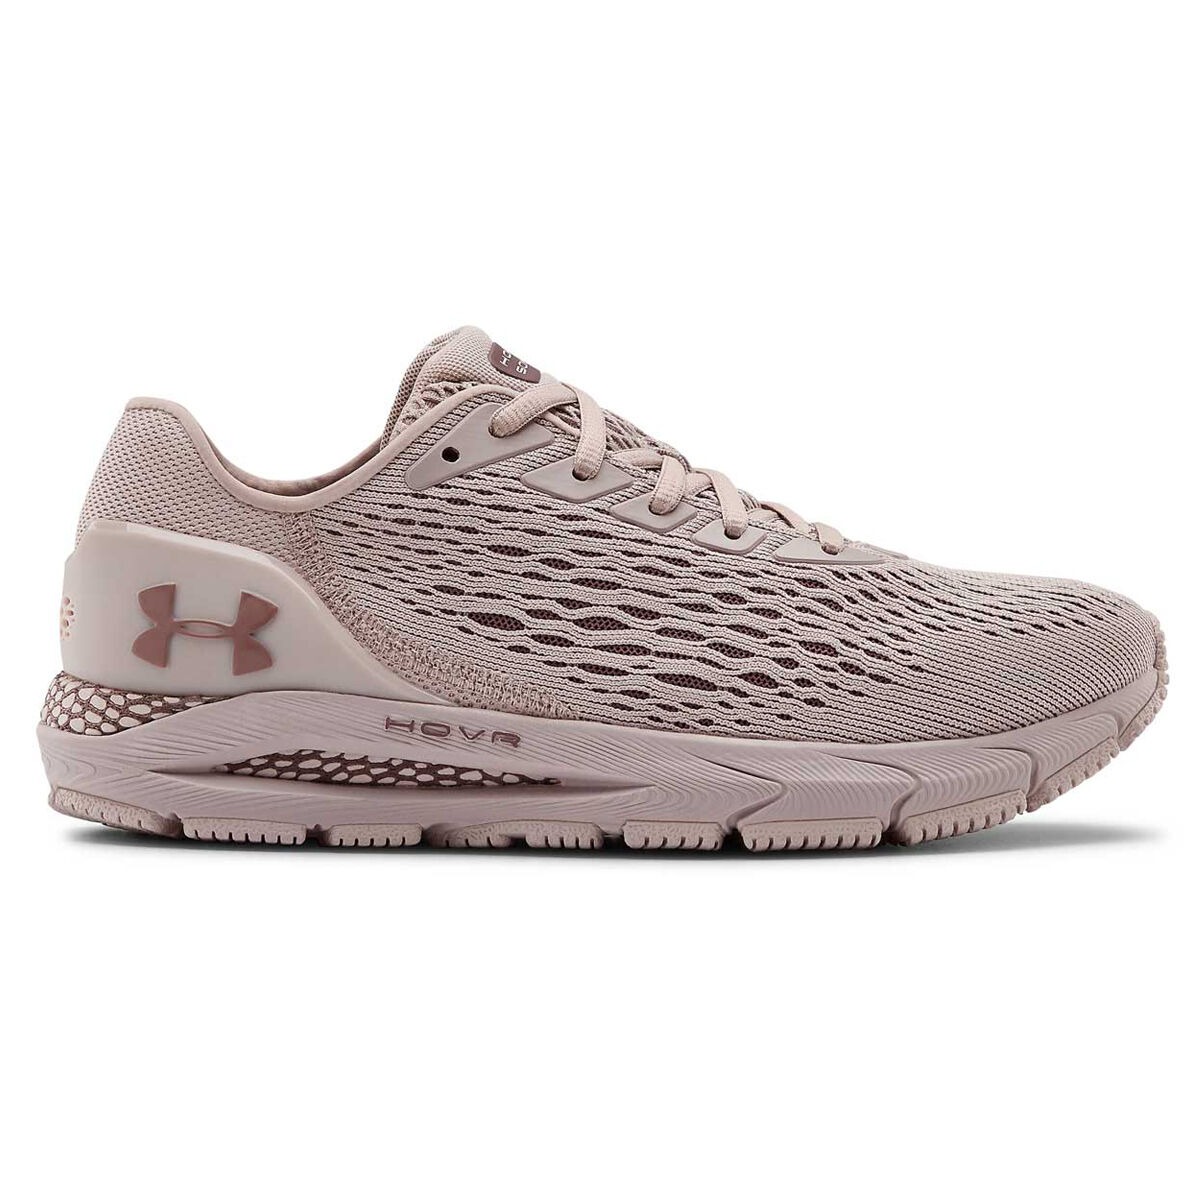 hovr under armor shoes